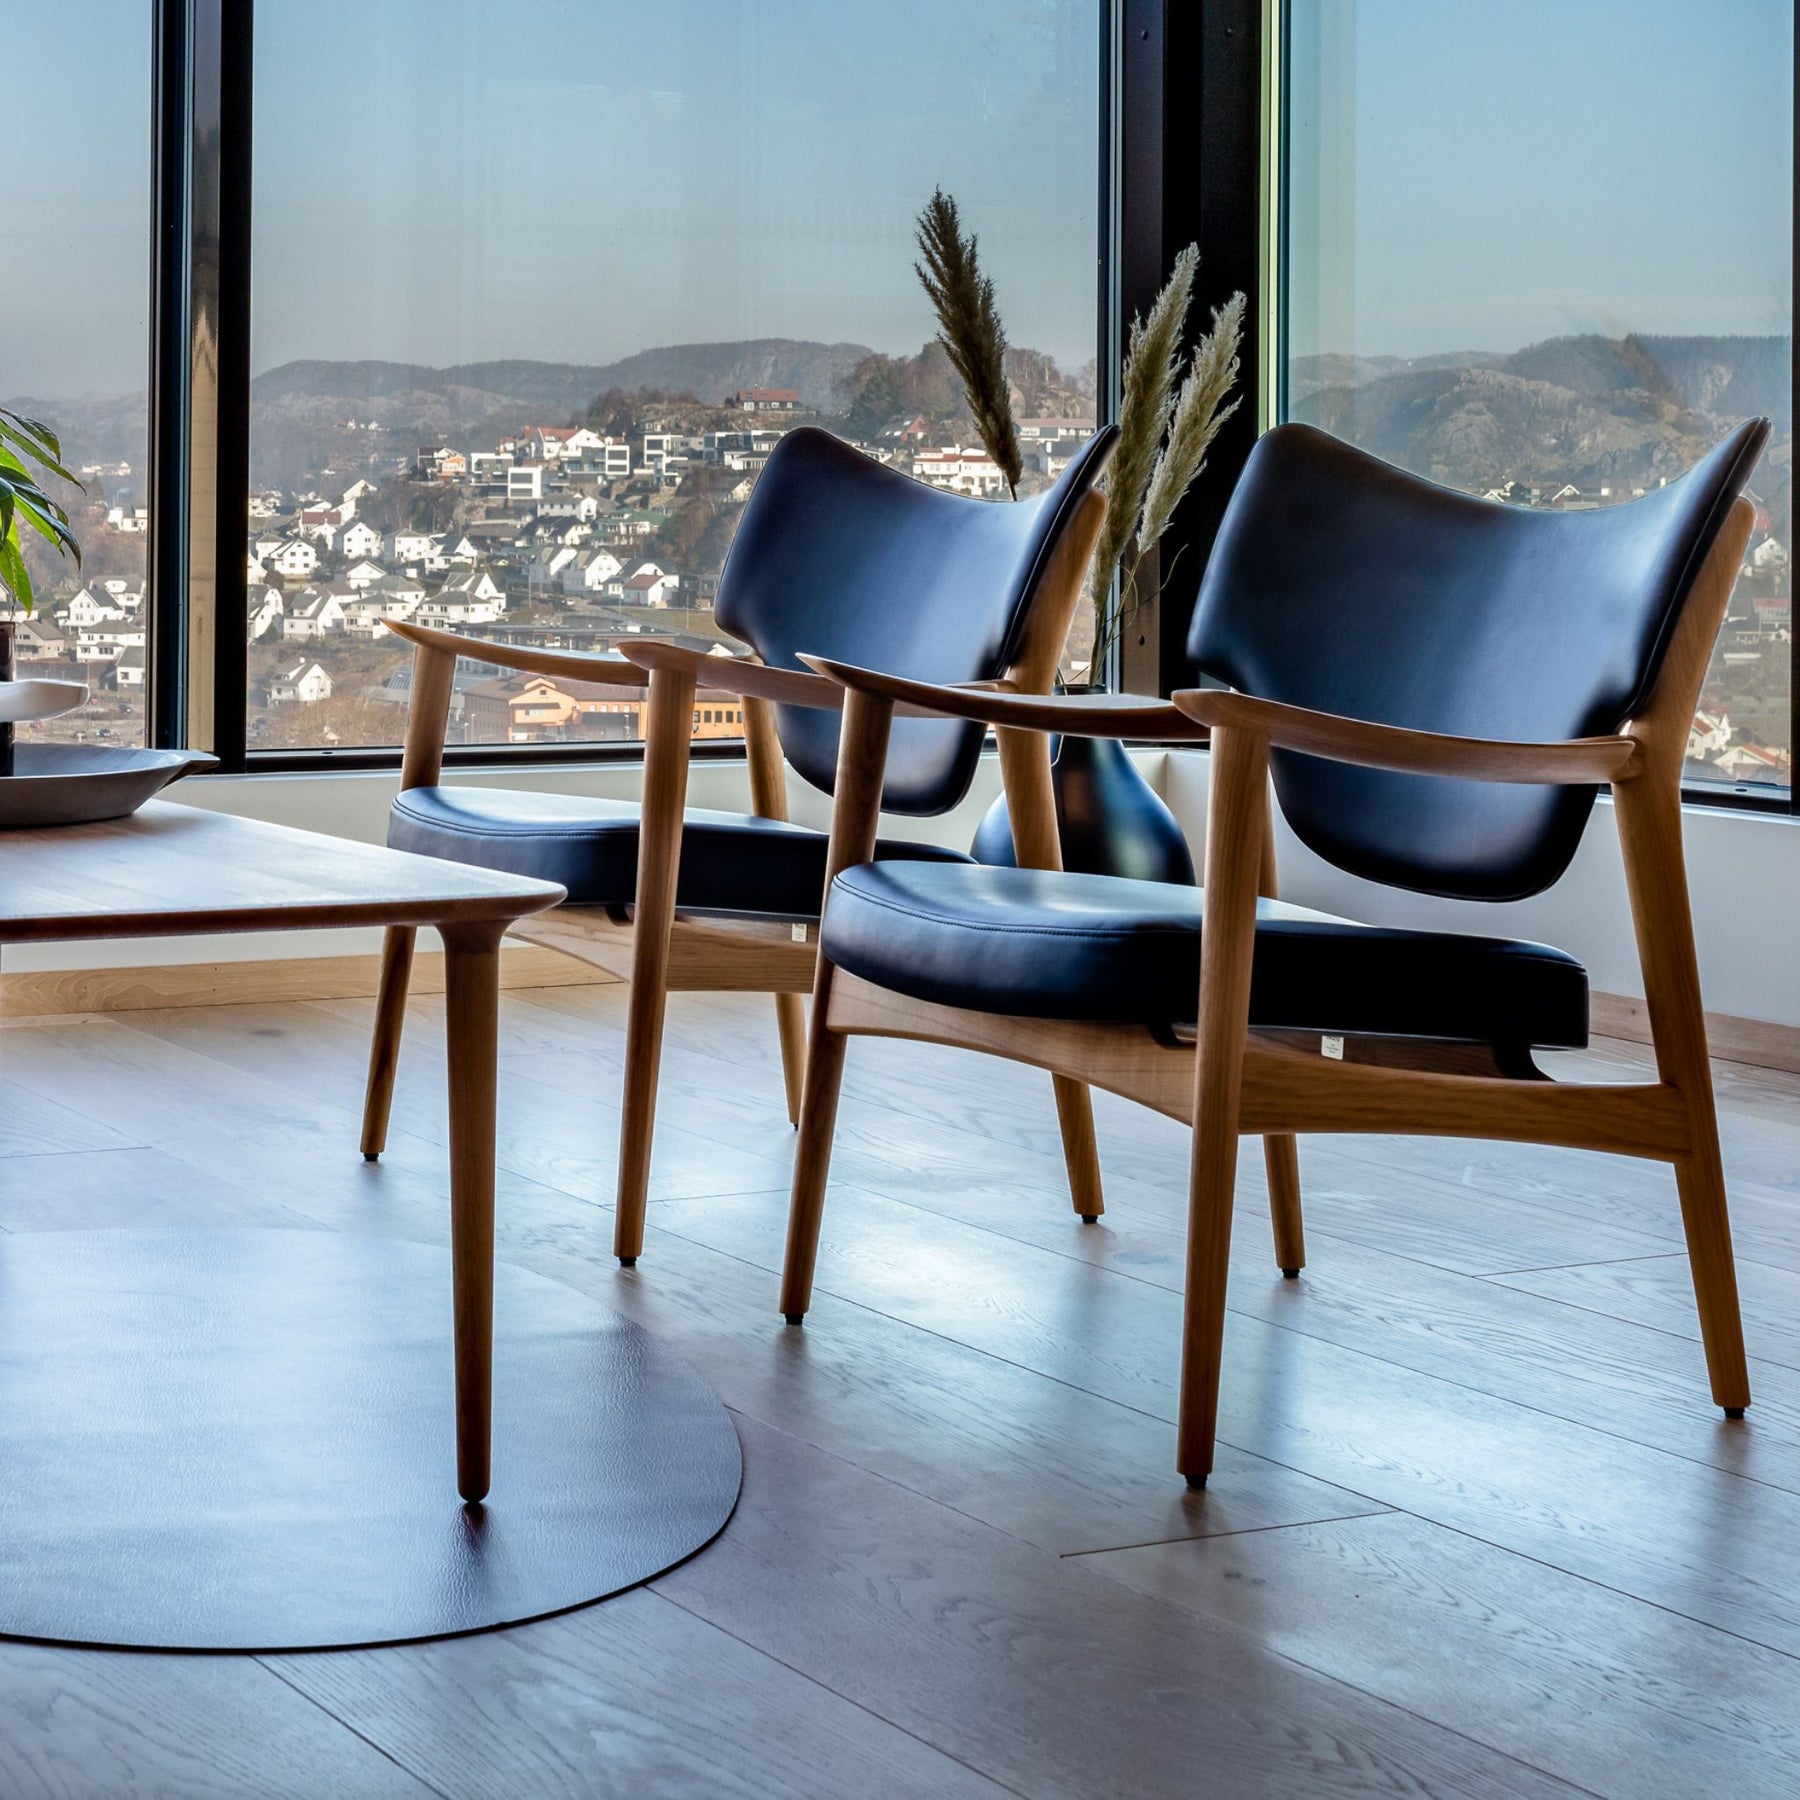 Eikund Veng Lounge Chairs Closeup in Norwegian Living Room with a View